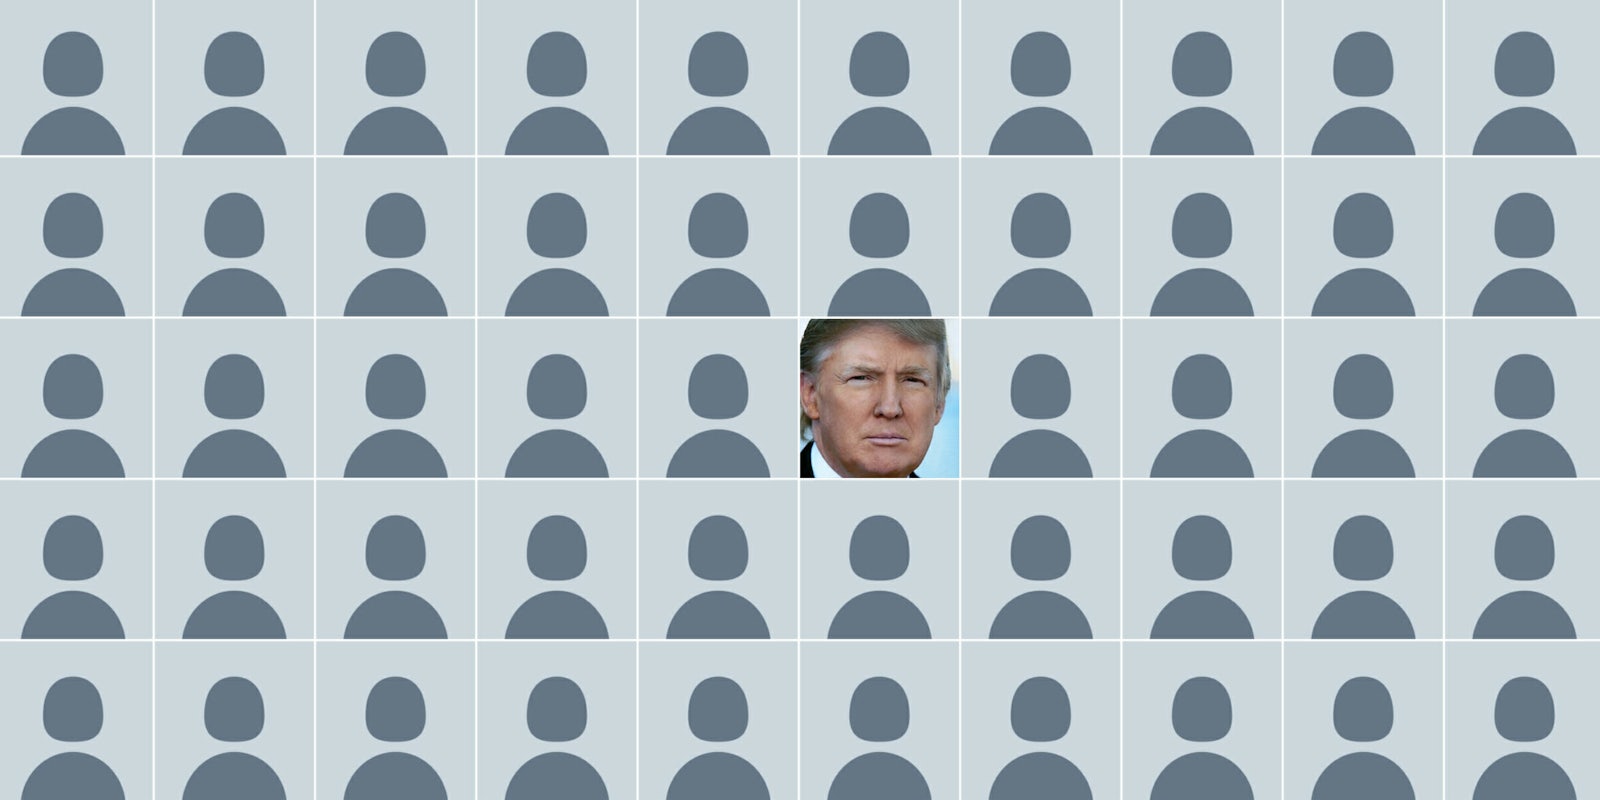 Trump's Twitter has gained a ton of fake accounts recently.